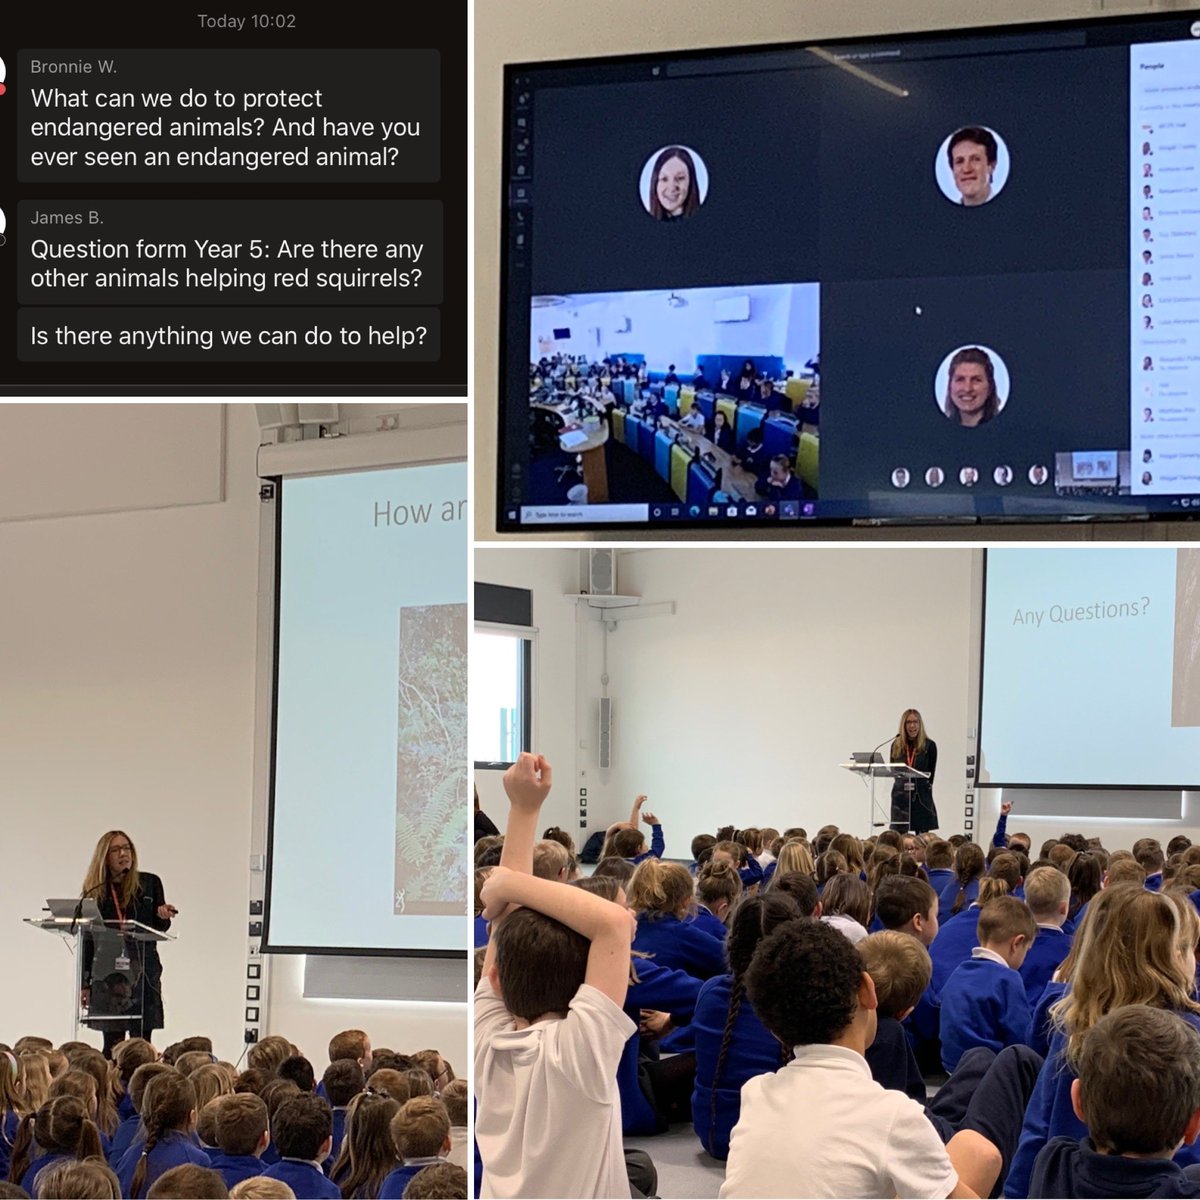 Fantastic assembly across the three schools today for #WomenInScienceDay by @AlexandraPulfer with @laleaver1 #STEM assembly using @MicrosoftTeams @Office365